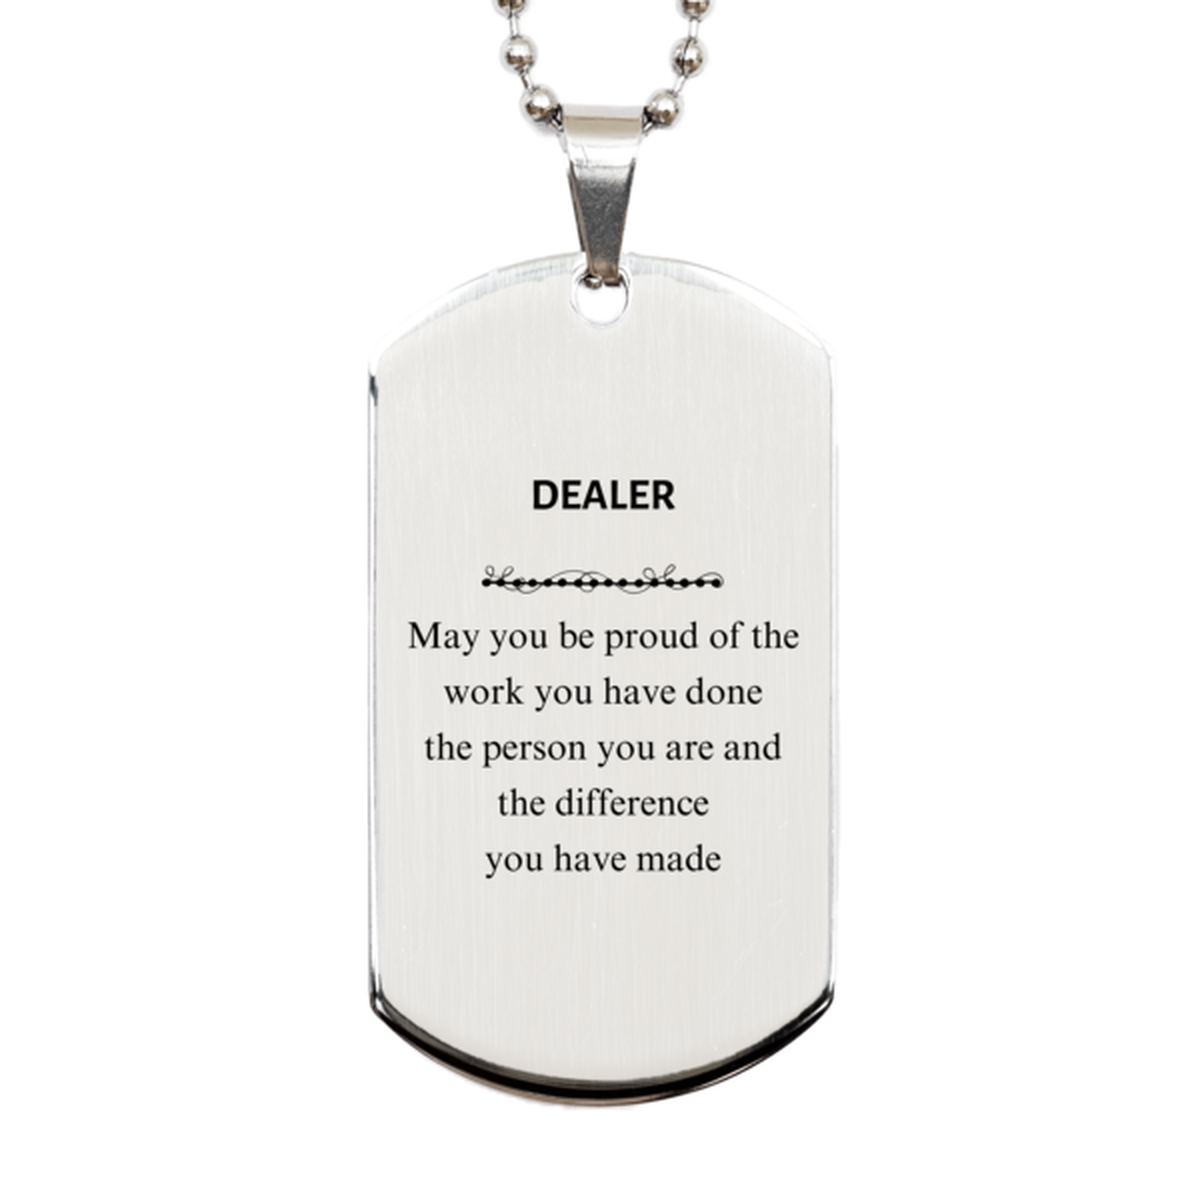 Dealer May you be proud of the work you have done, Retirement Dealer Silver Dog Tag for Colleague Appreciation Gifts Amazing for Dealer